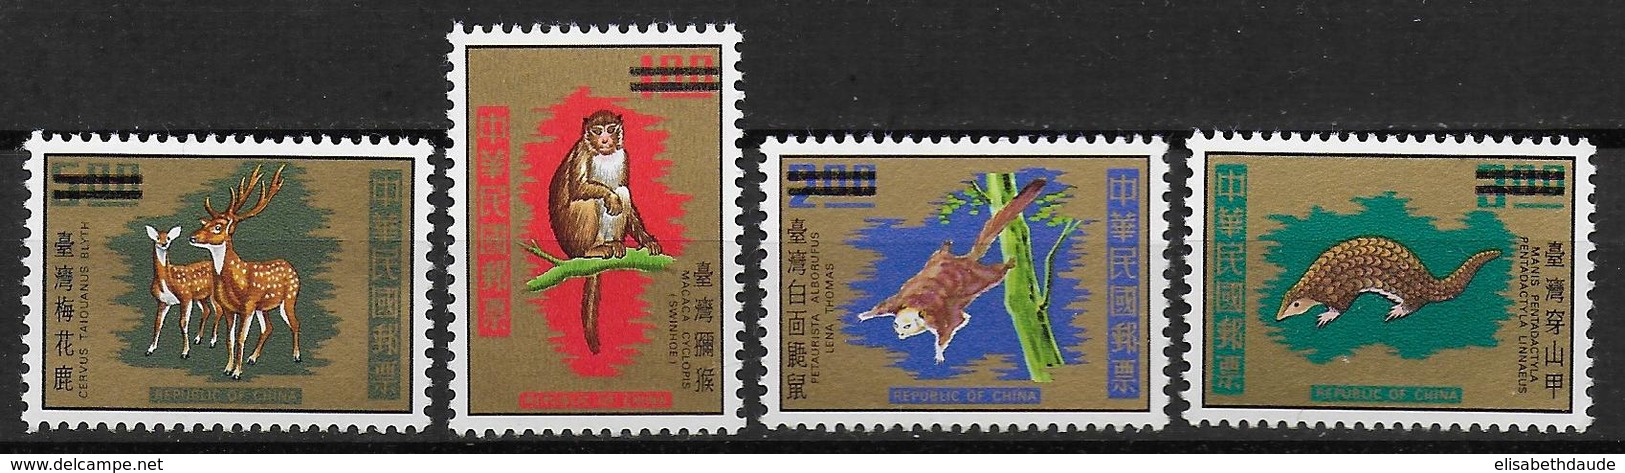 CHINE / FORMOSE - YVERT N° 763/766 SURCHARGE ANNULANT LA VALEUR ** - ANIMAUX - Neufs